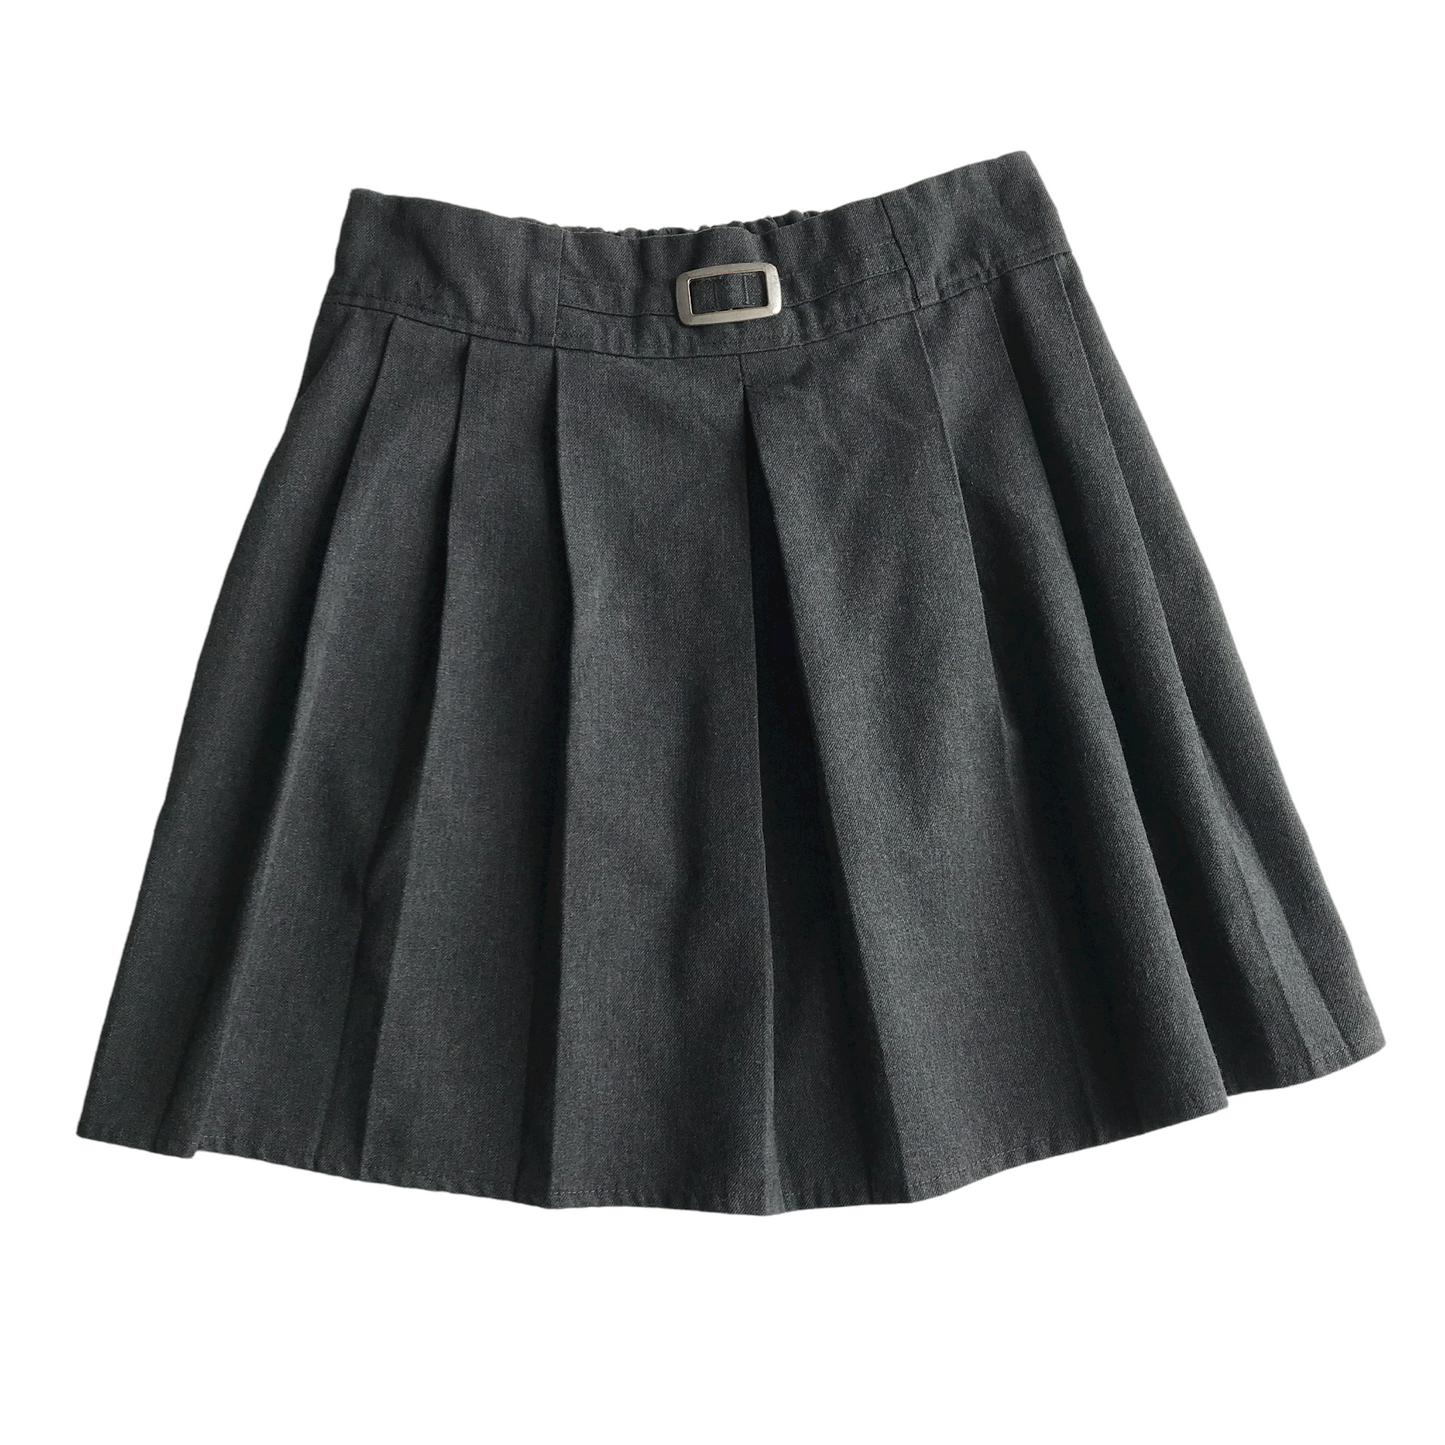 Grey School Skirt with Buckle Detail